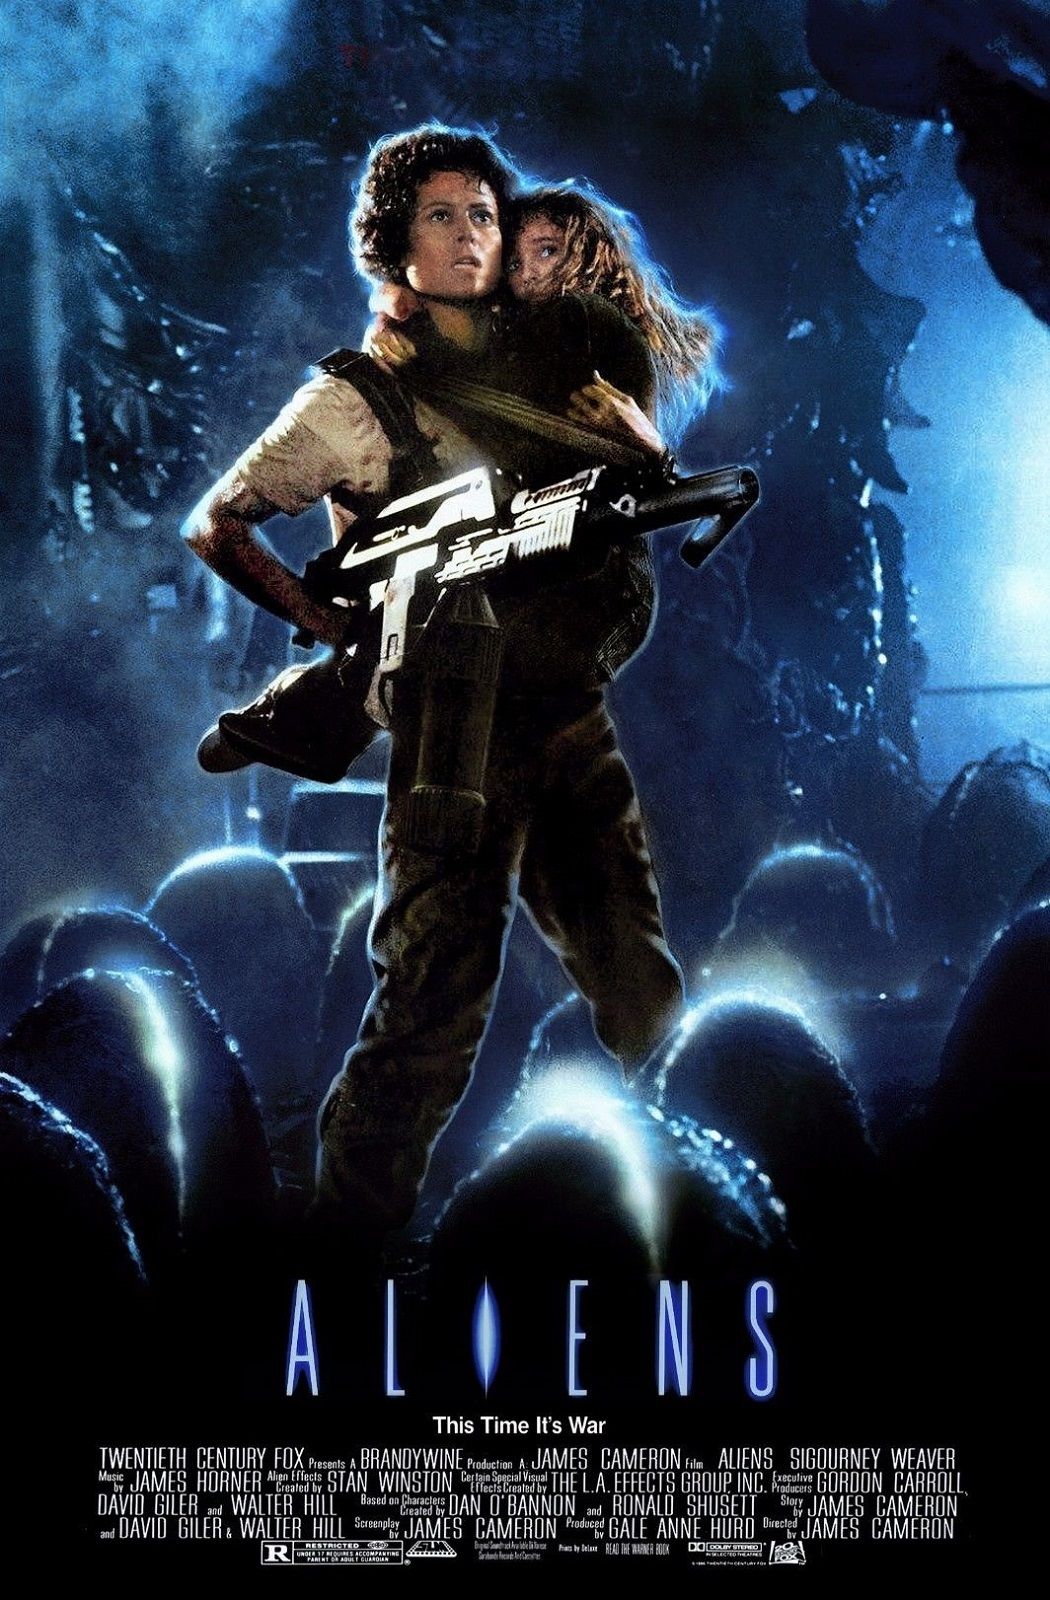 Aliens 4K Blu-ray (Ultimate Collector's Edition)